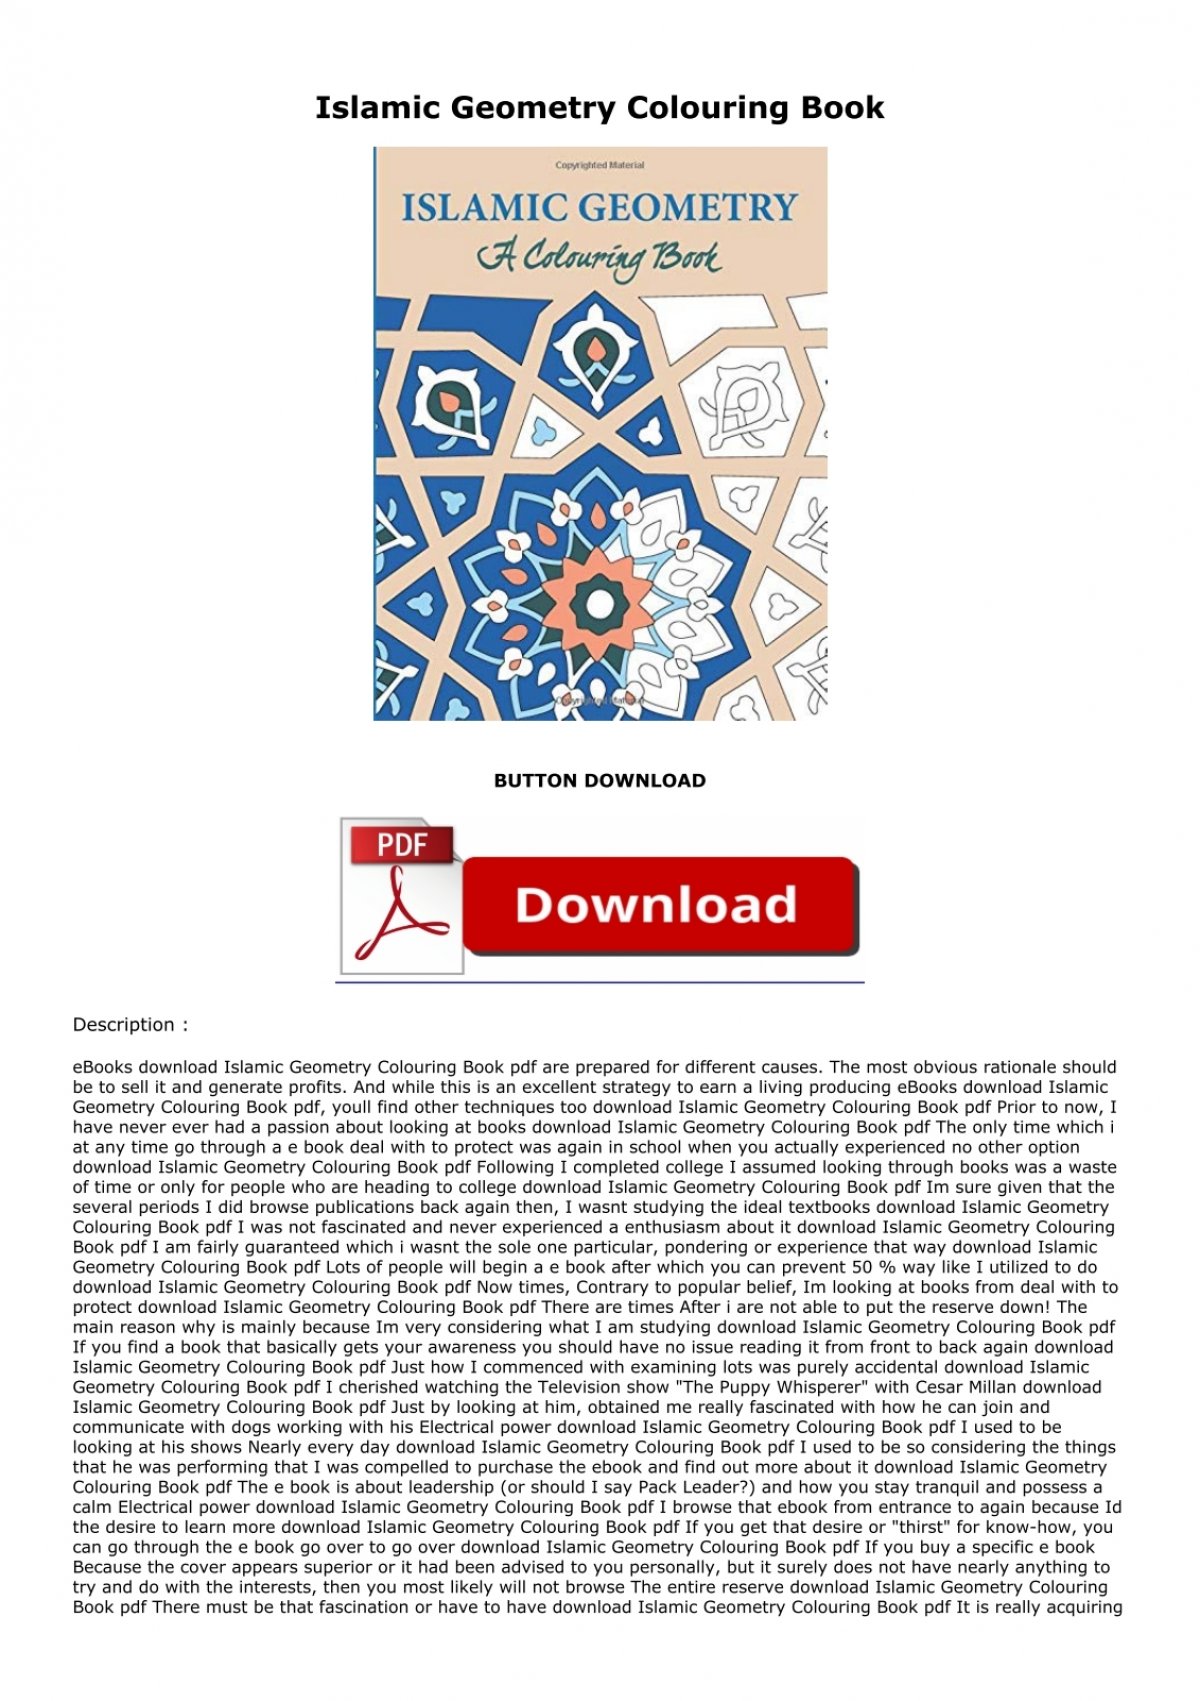 Download Pdf Islamic Geometry Colouring Book Free Acces